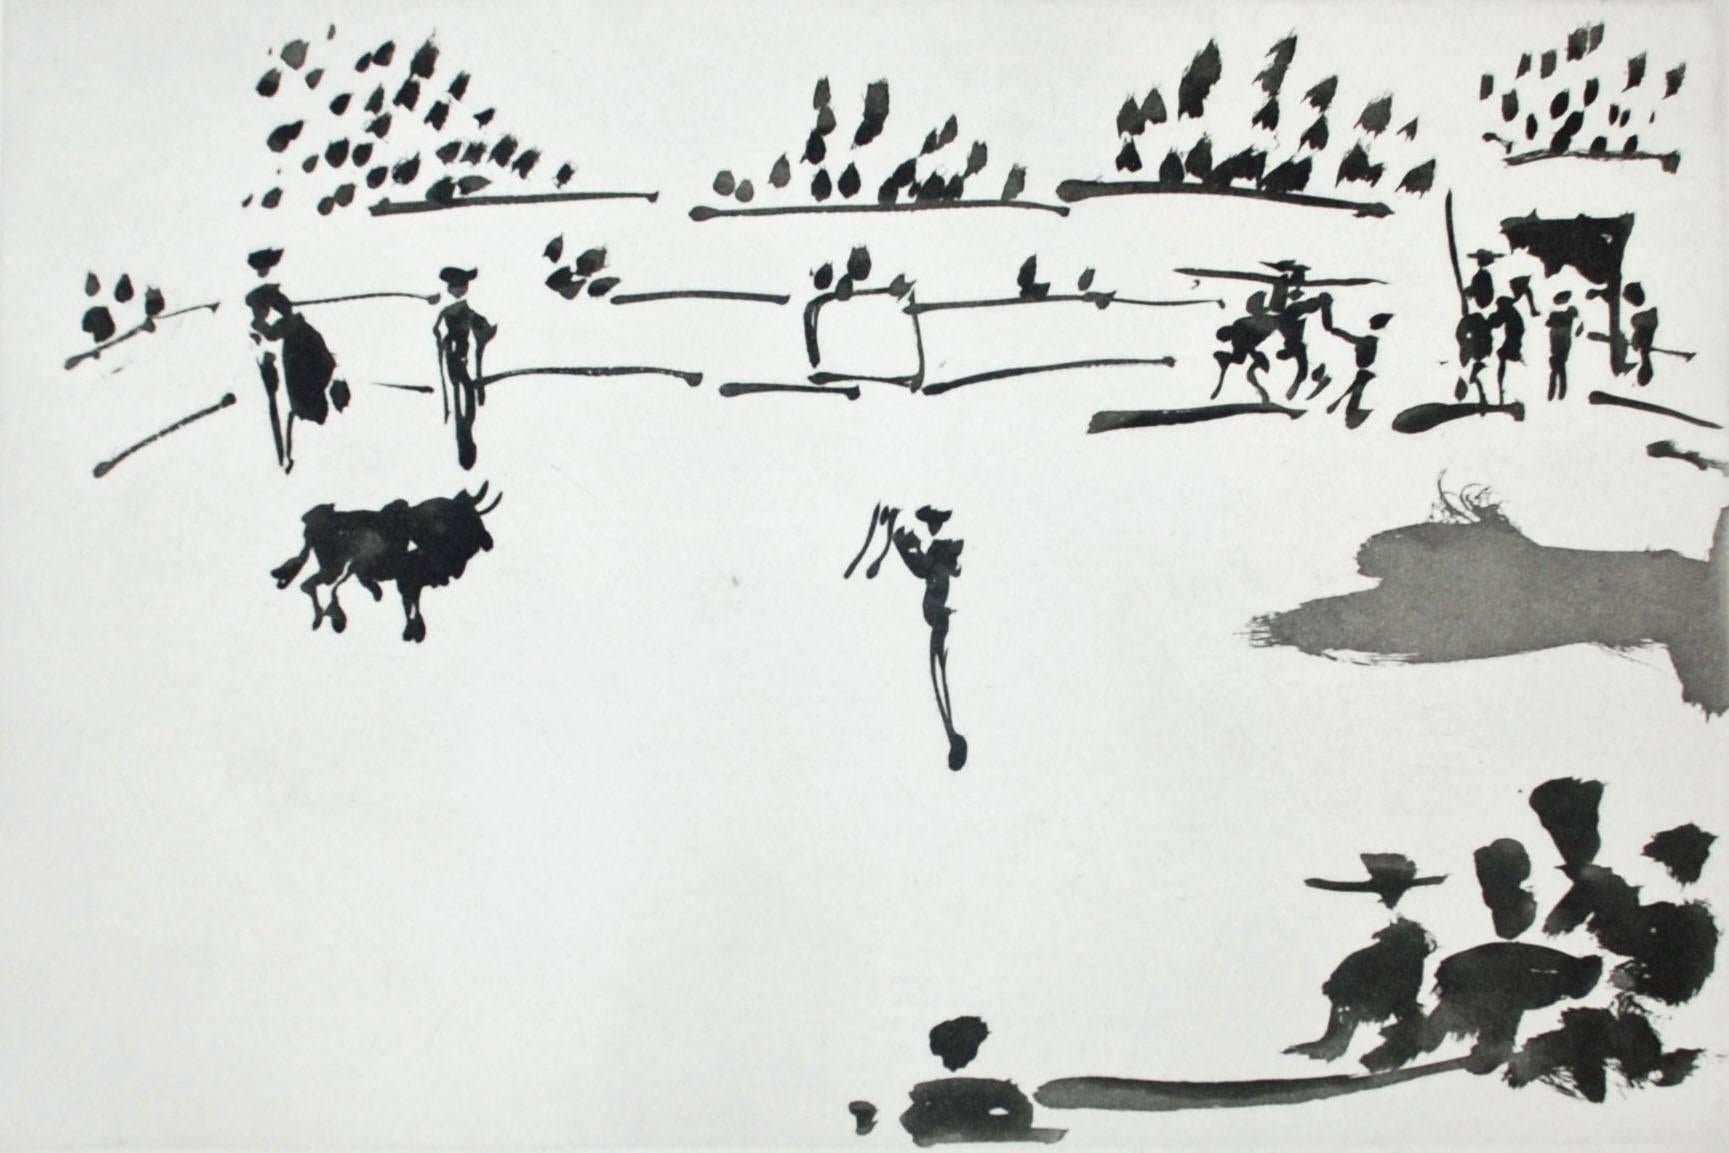 Pablo Picasso Landscape Print - Citando a Banderillas (Summoning to the Flags), from La Tauromaquia